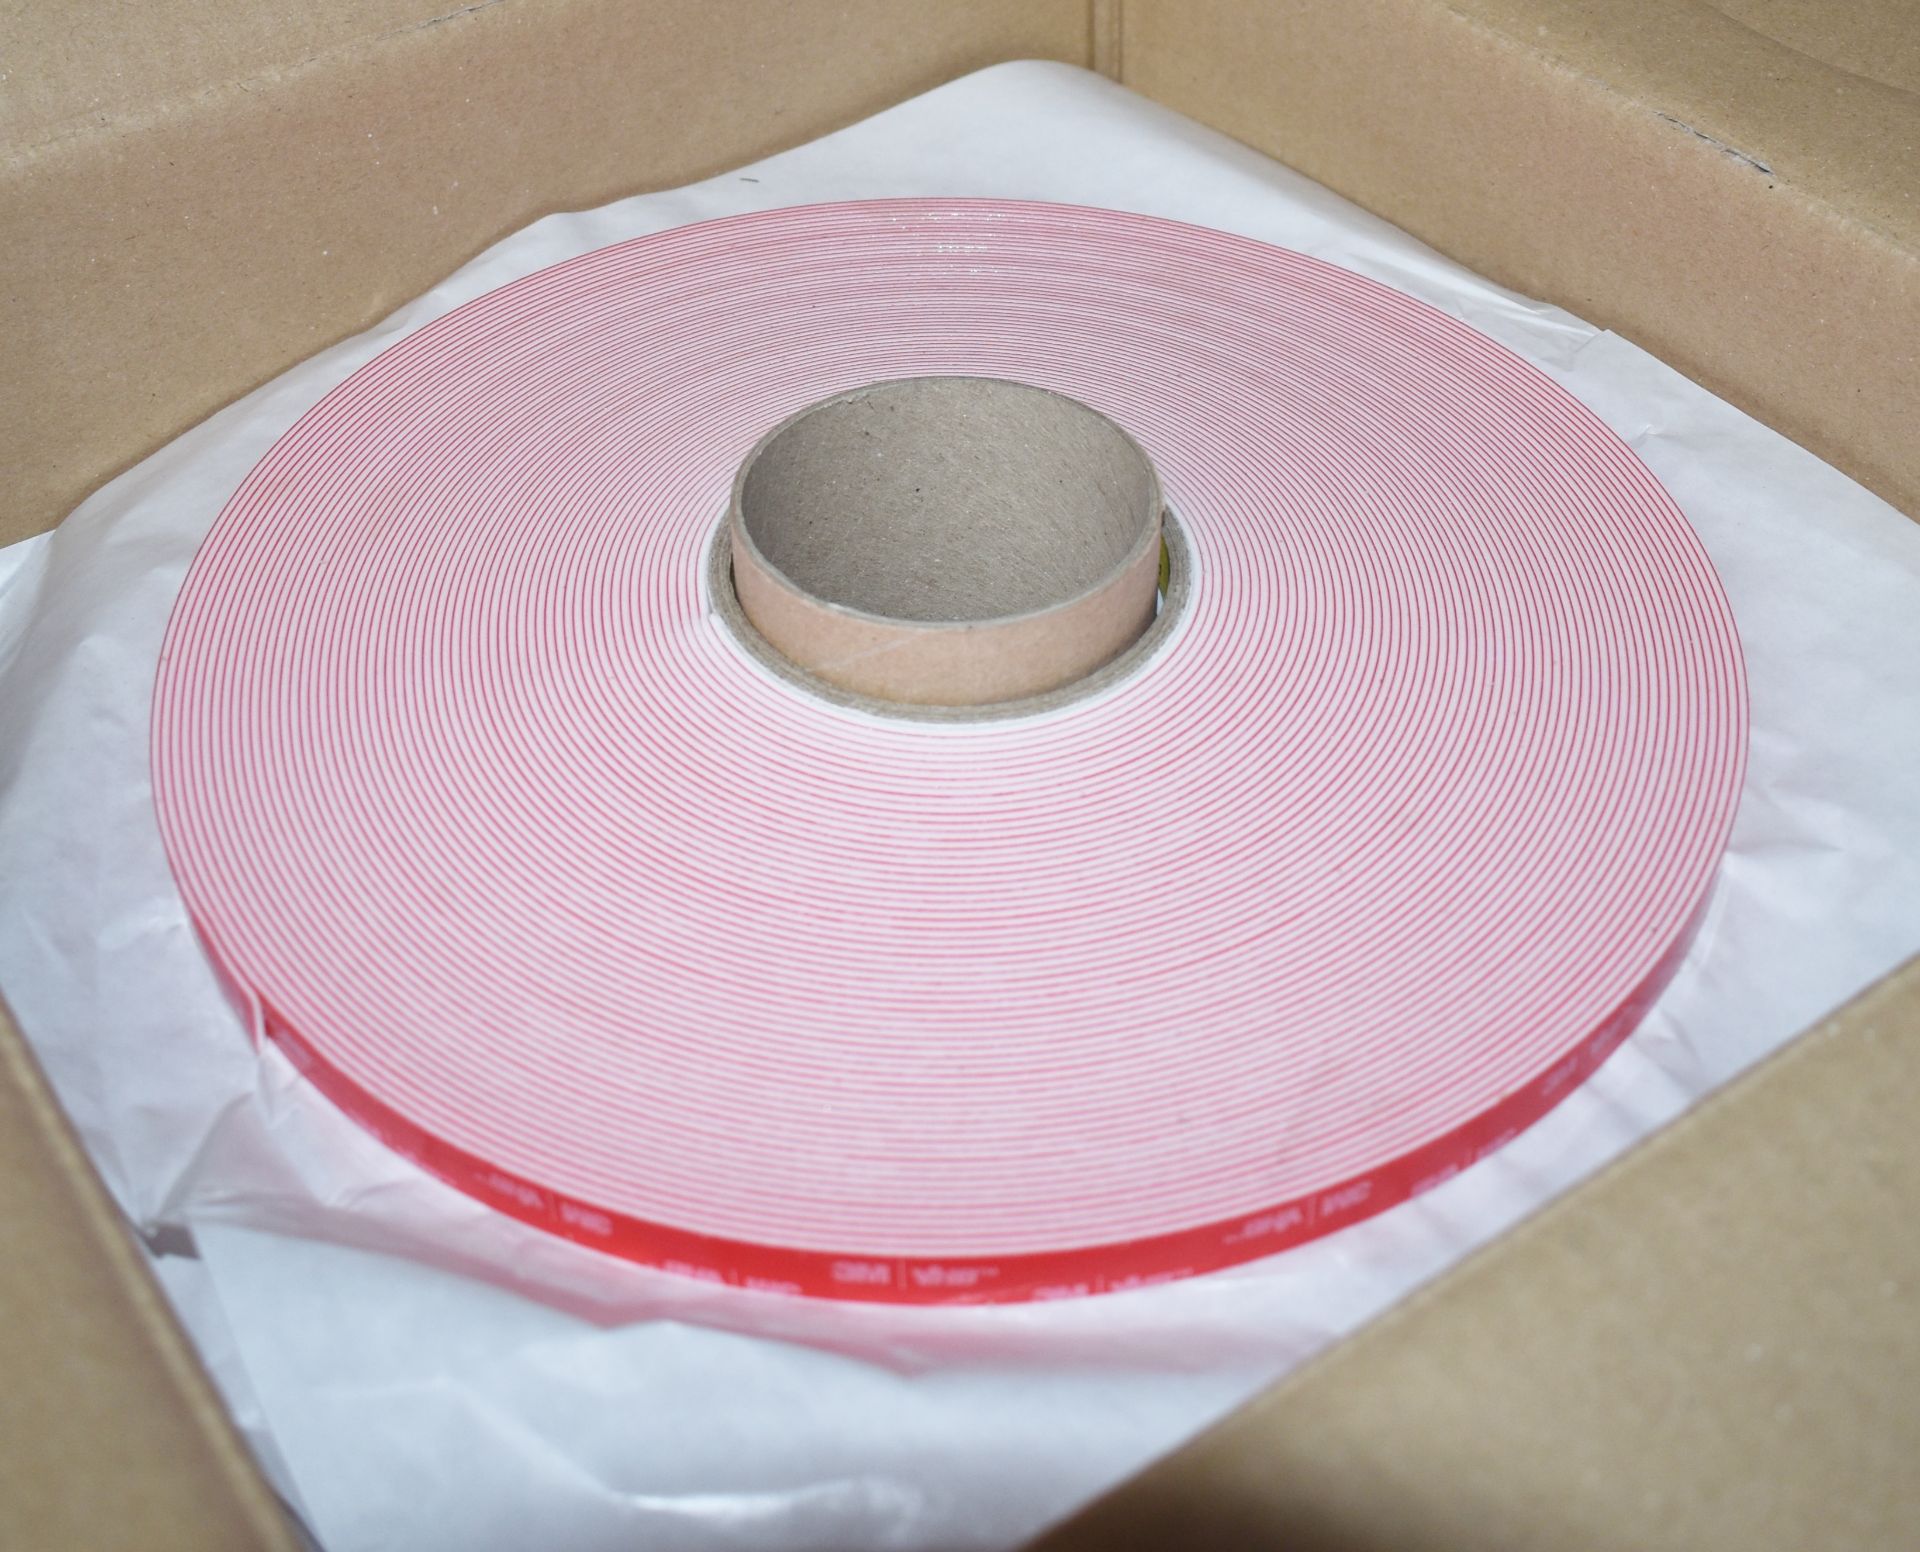 8 x Rolls of 3M VHB Double Sided Acrylic Adhesive Foam Core Tape - Type LSE-160WF - RRP £336 - New - Image 3 of 4